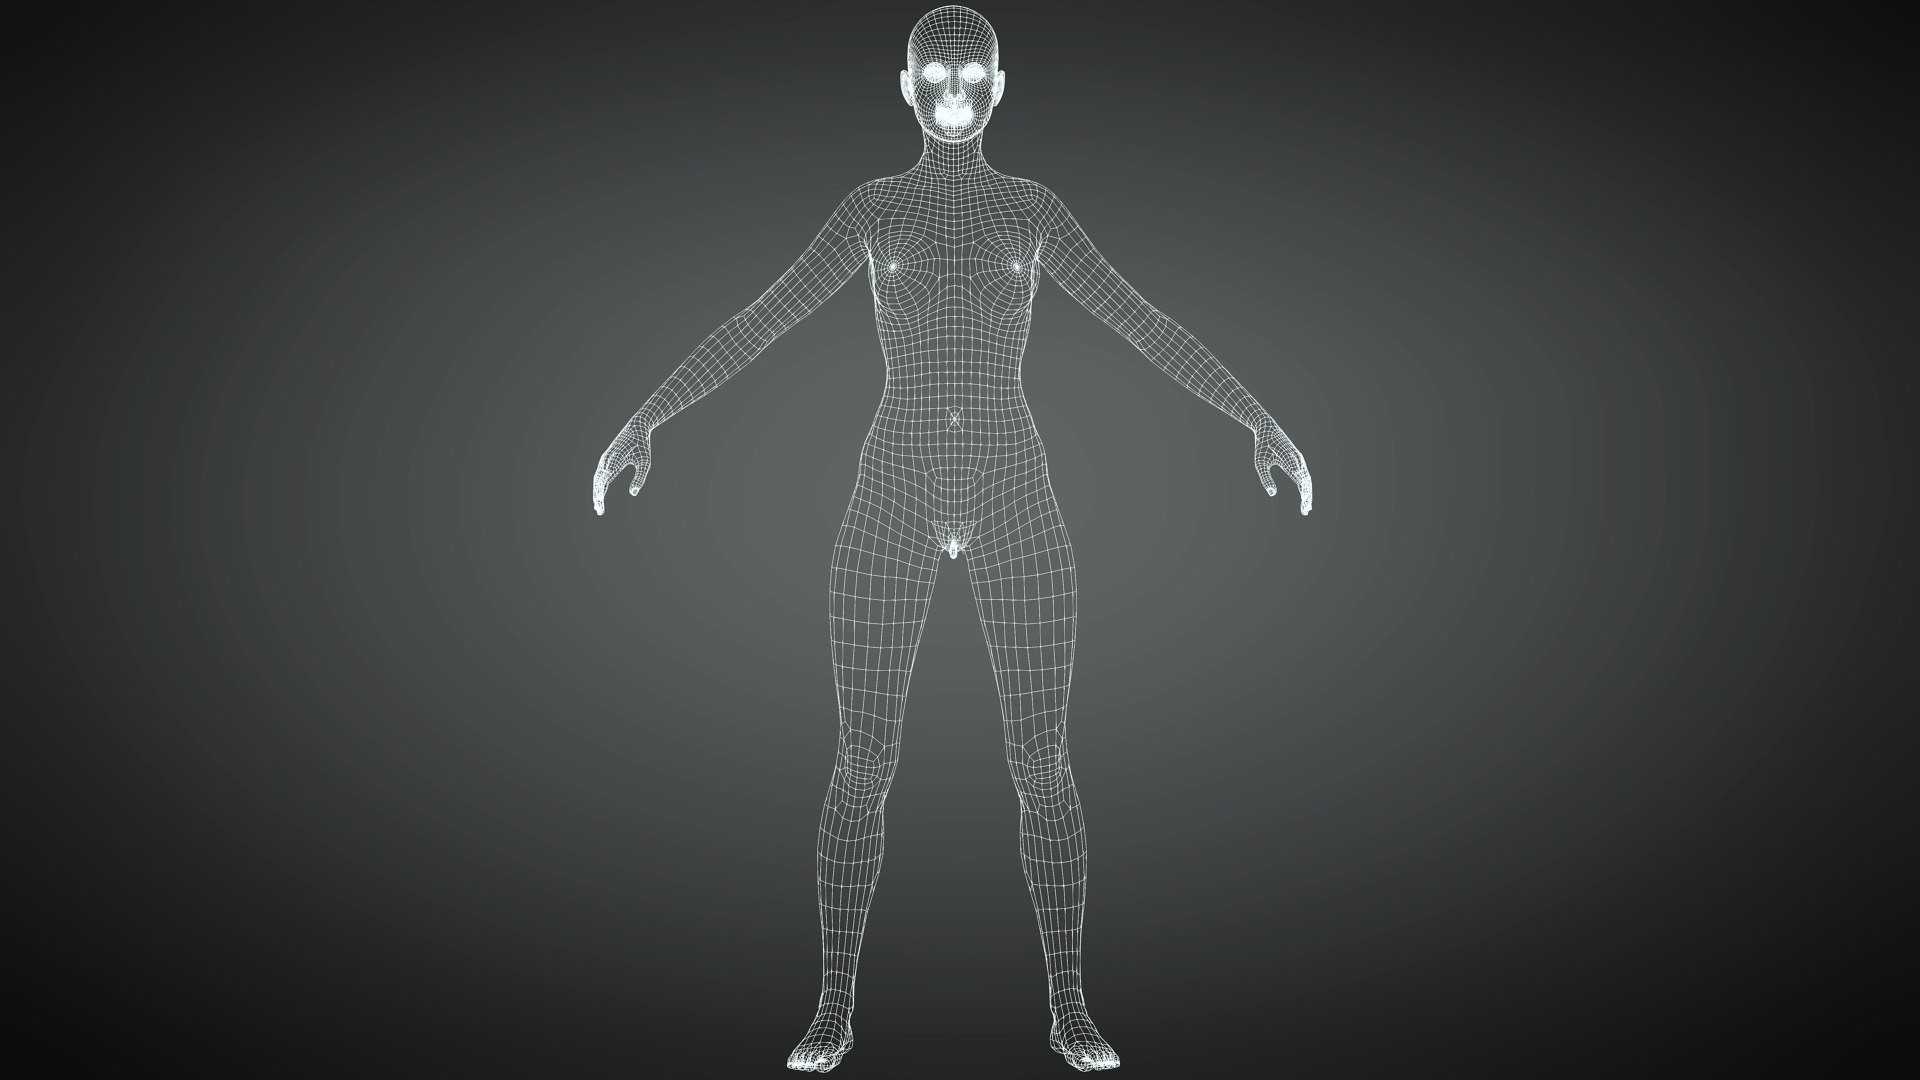 Female Genitalia Pack 9 Models For Character Creator 3 And 4 3d Turbosquid 1960760 2164